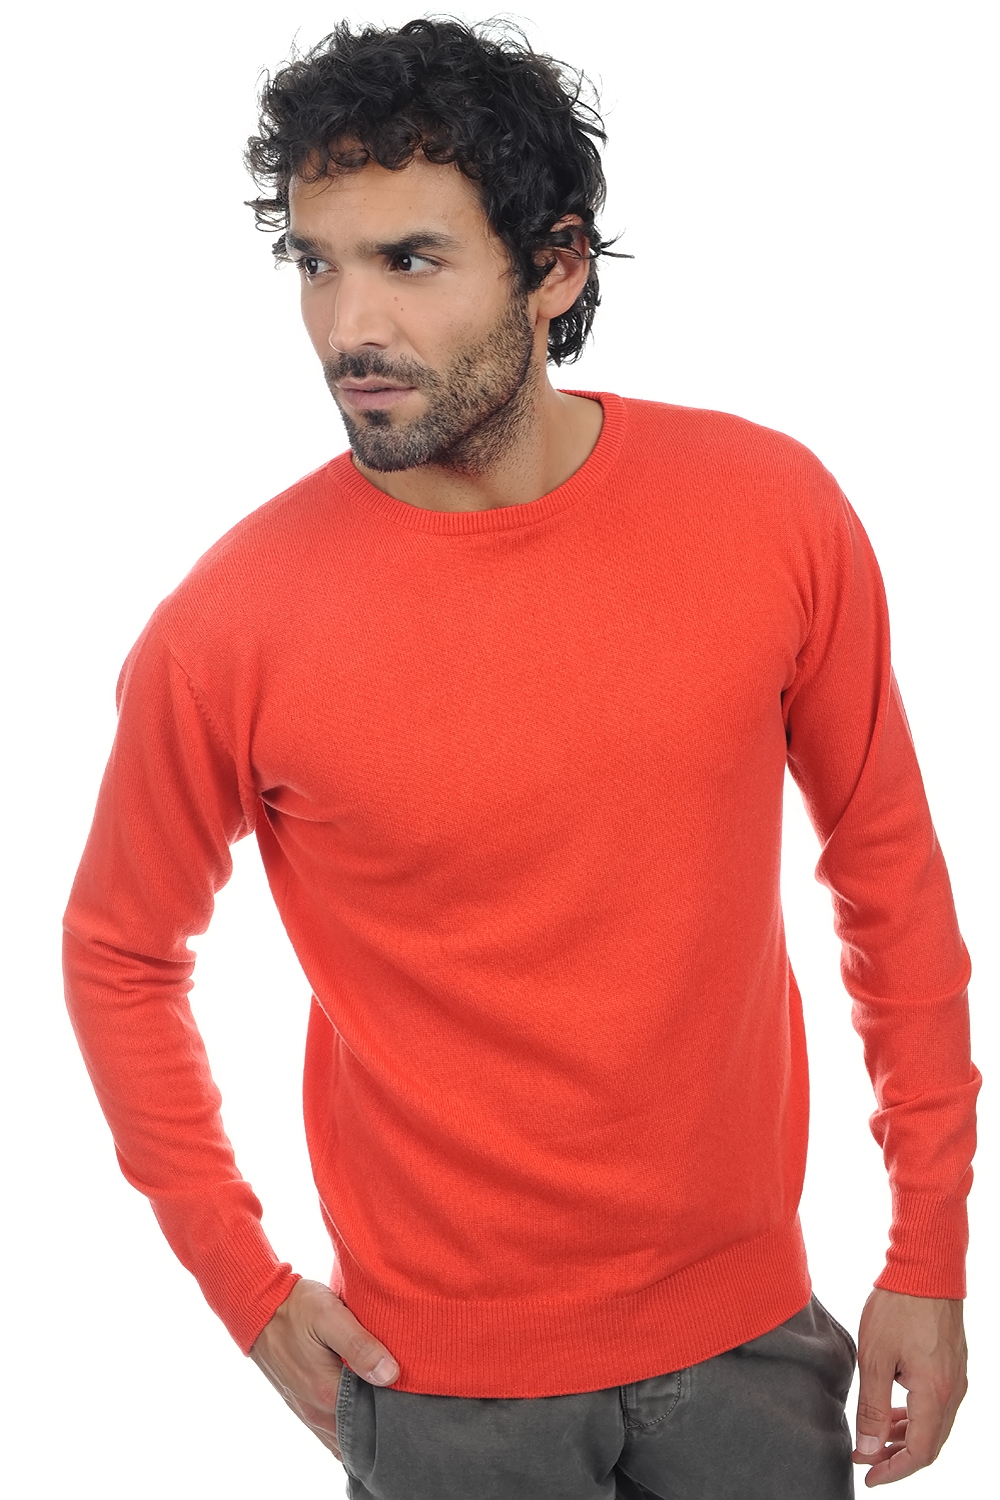 Cachemire pull homme col rond keaton corail lumineux 4xl